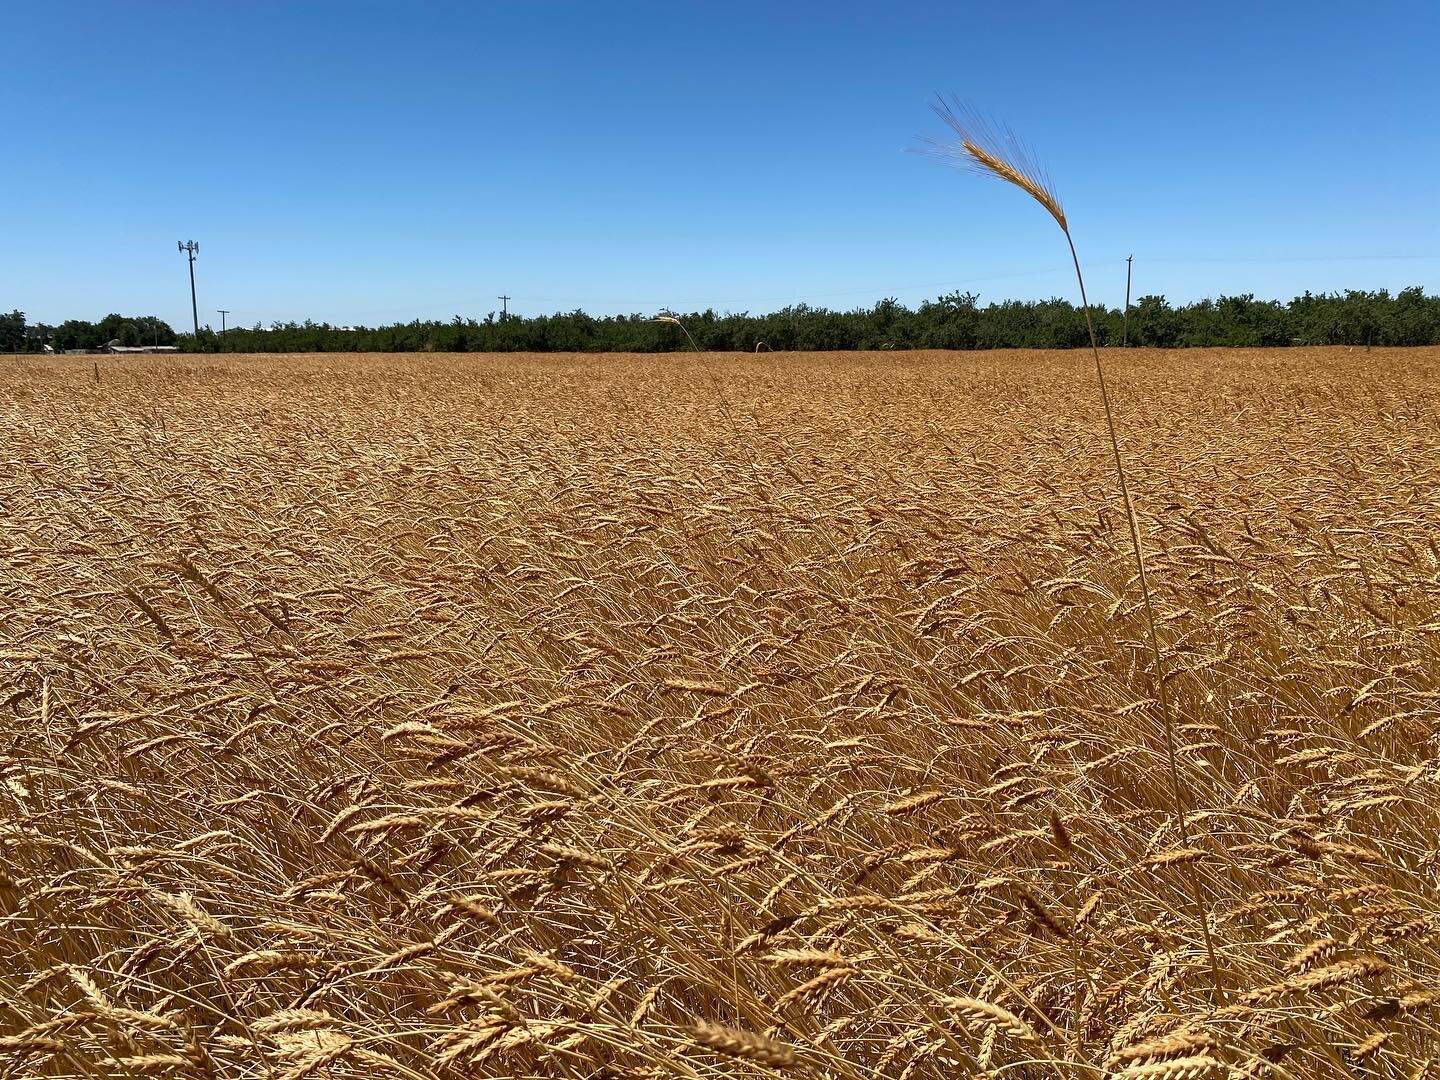 Hanging out with the brothers Eck for their second wheat harvest today! Is there anything prettier than a field of golden grain? 😍🌾😍🌾 #localgraineconomy #localwheat